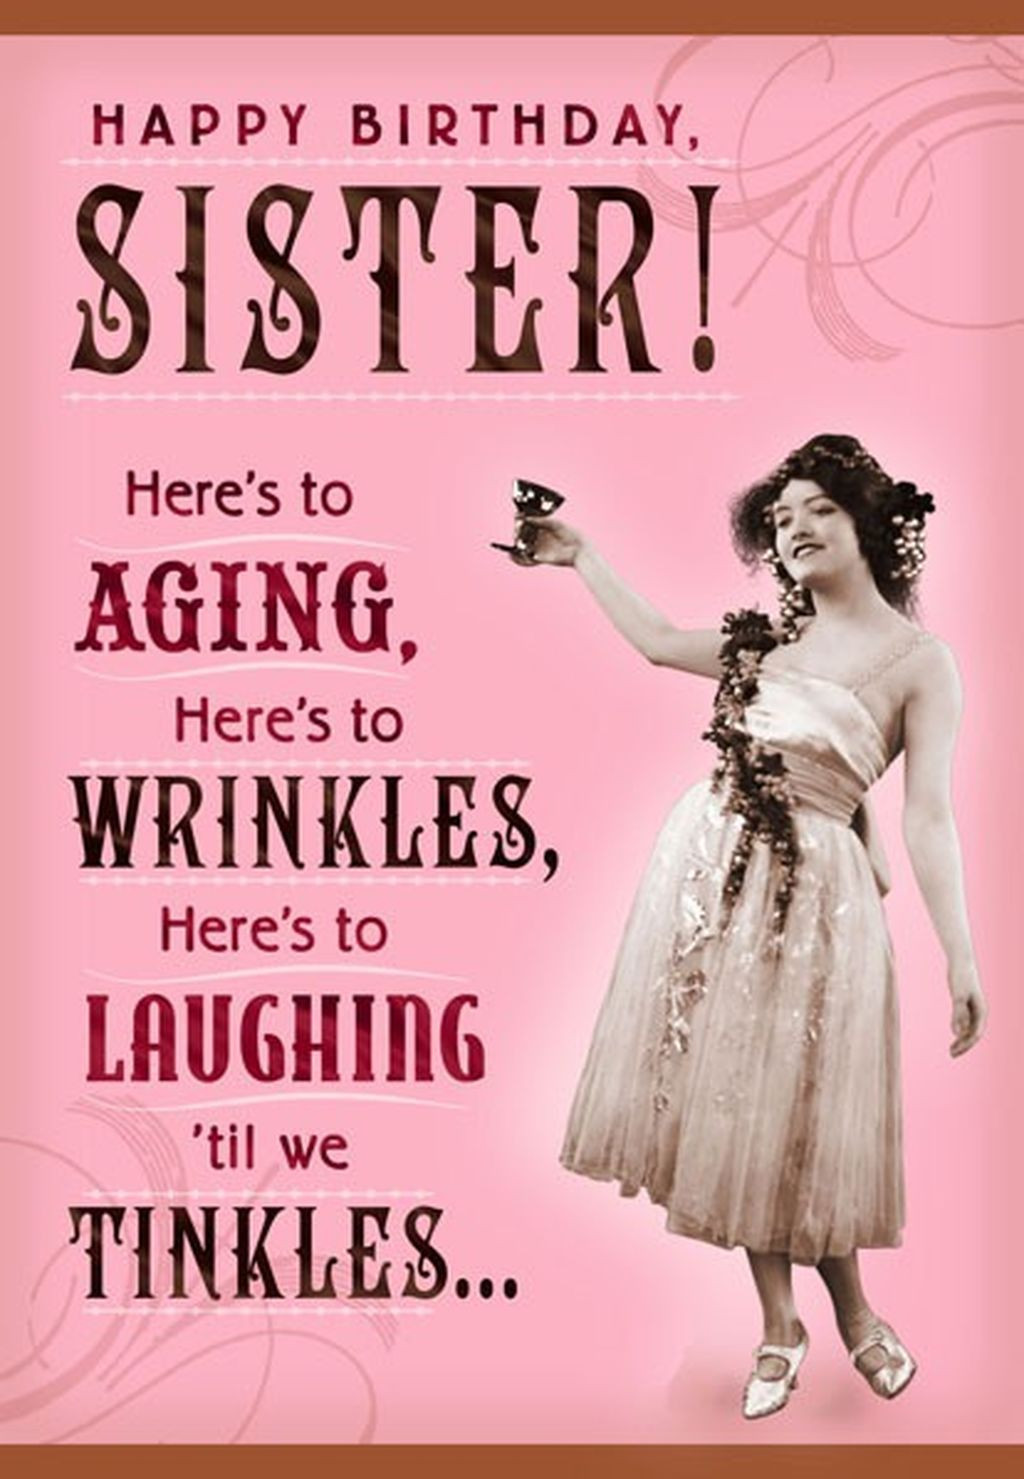 Happy Birthday Sister Funny Cards
 Wrinkles and Tinkles Sister Birthday Card